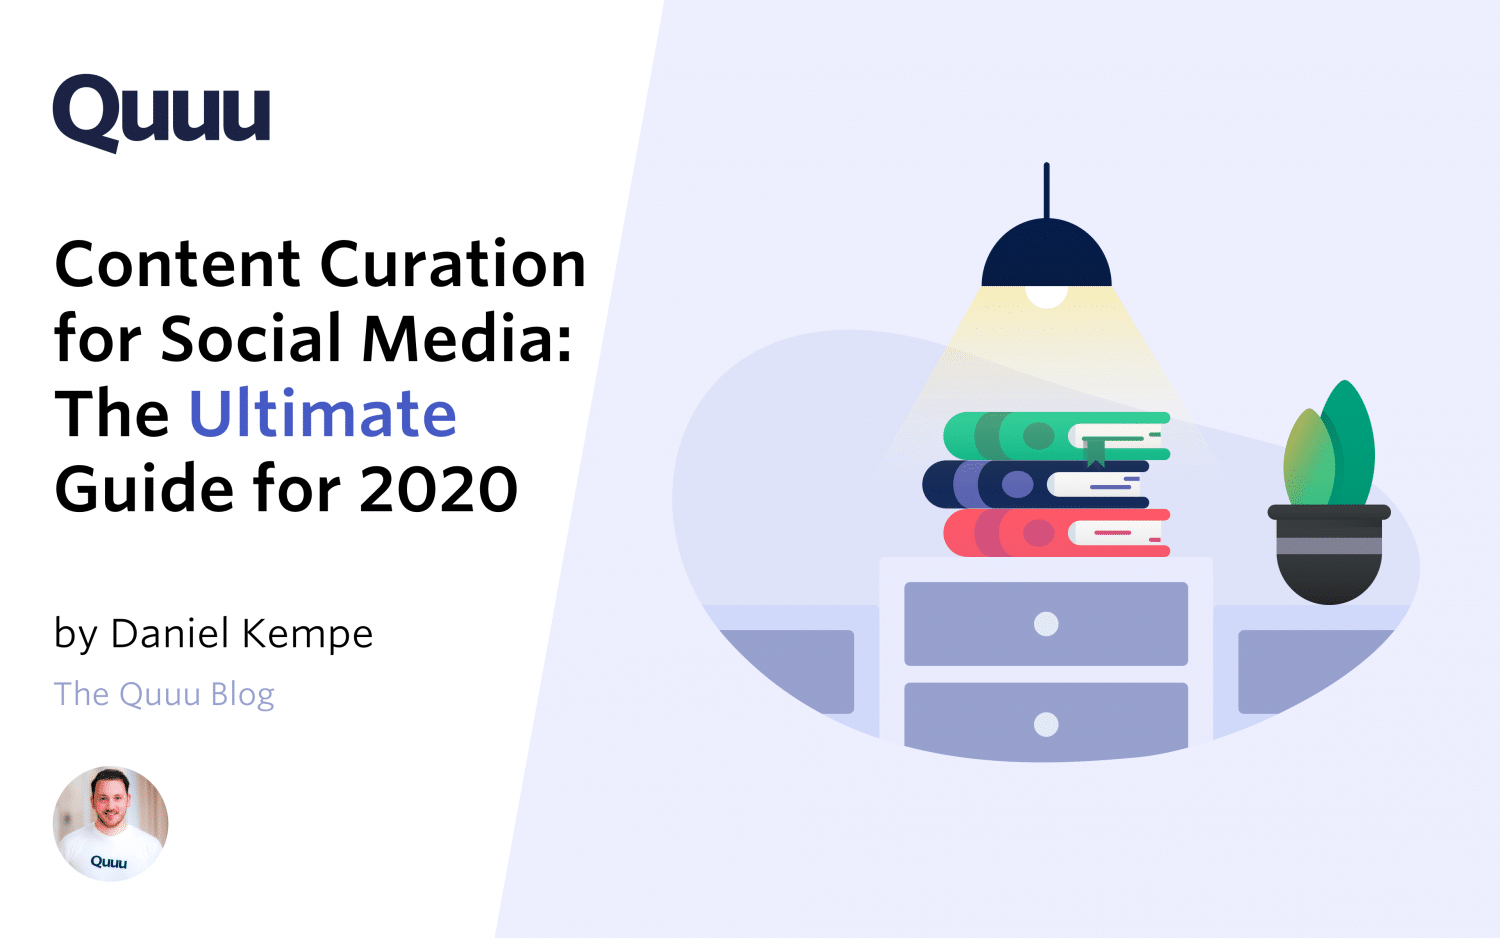 Content curation for social media: The ultimate guide for 2020